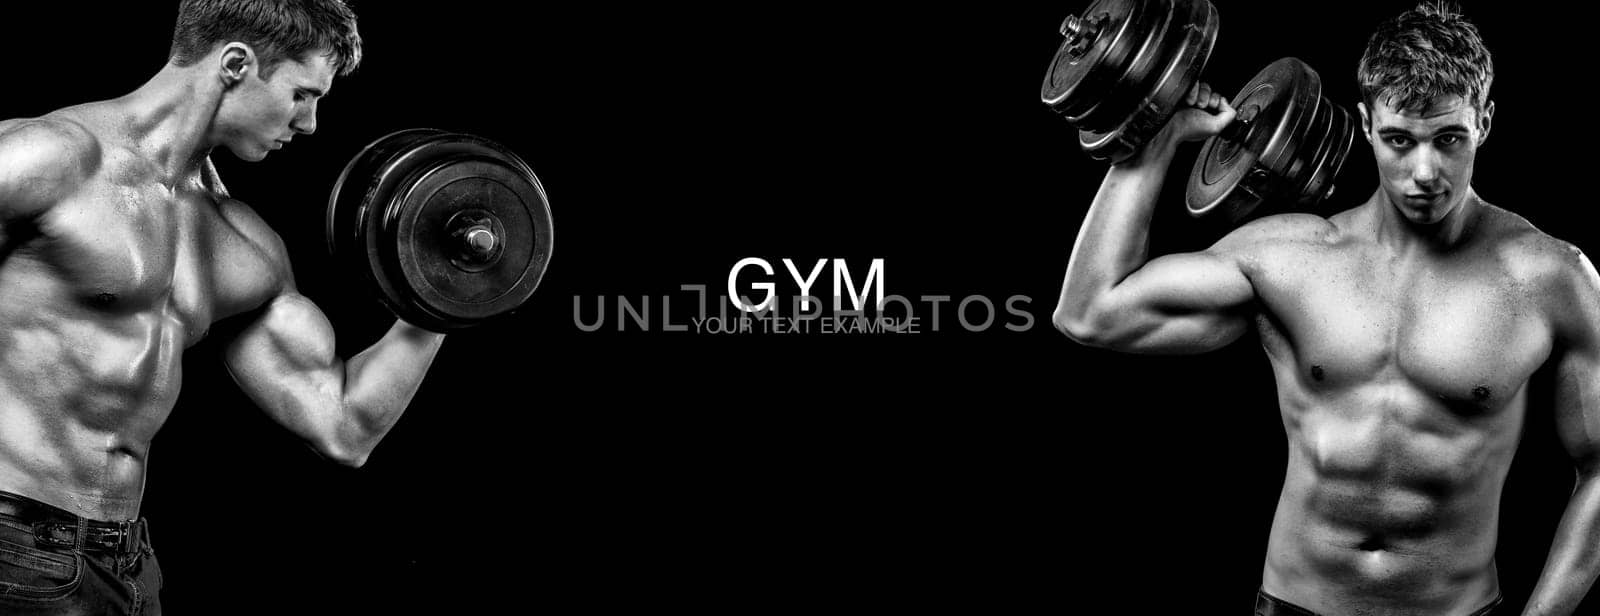 Sporty and fit man with dumbbell exercising at black background to stay fit. Workout and fitness motivation. by MikeOrlov